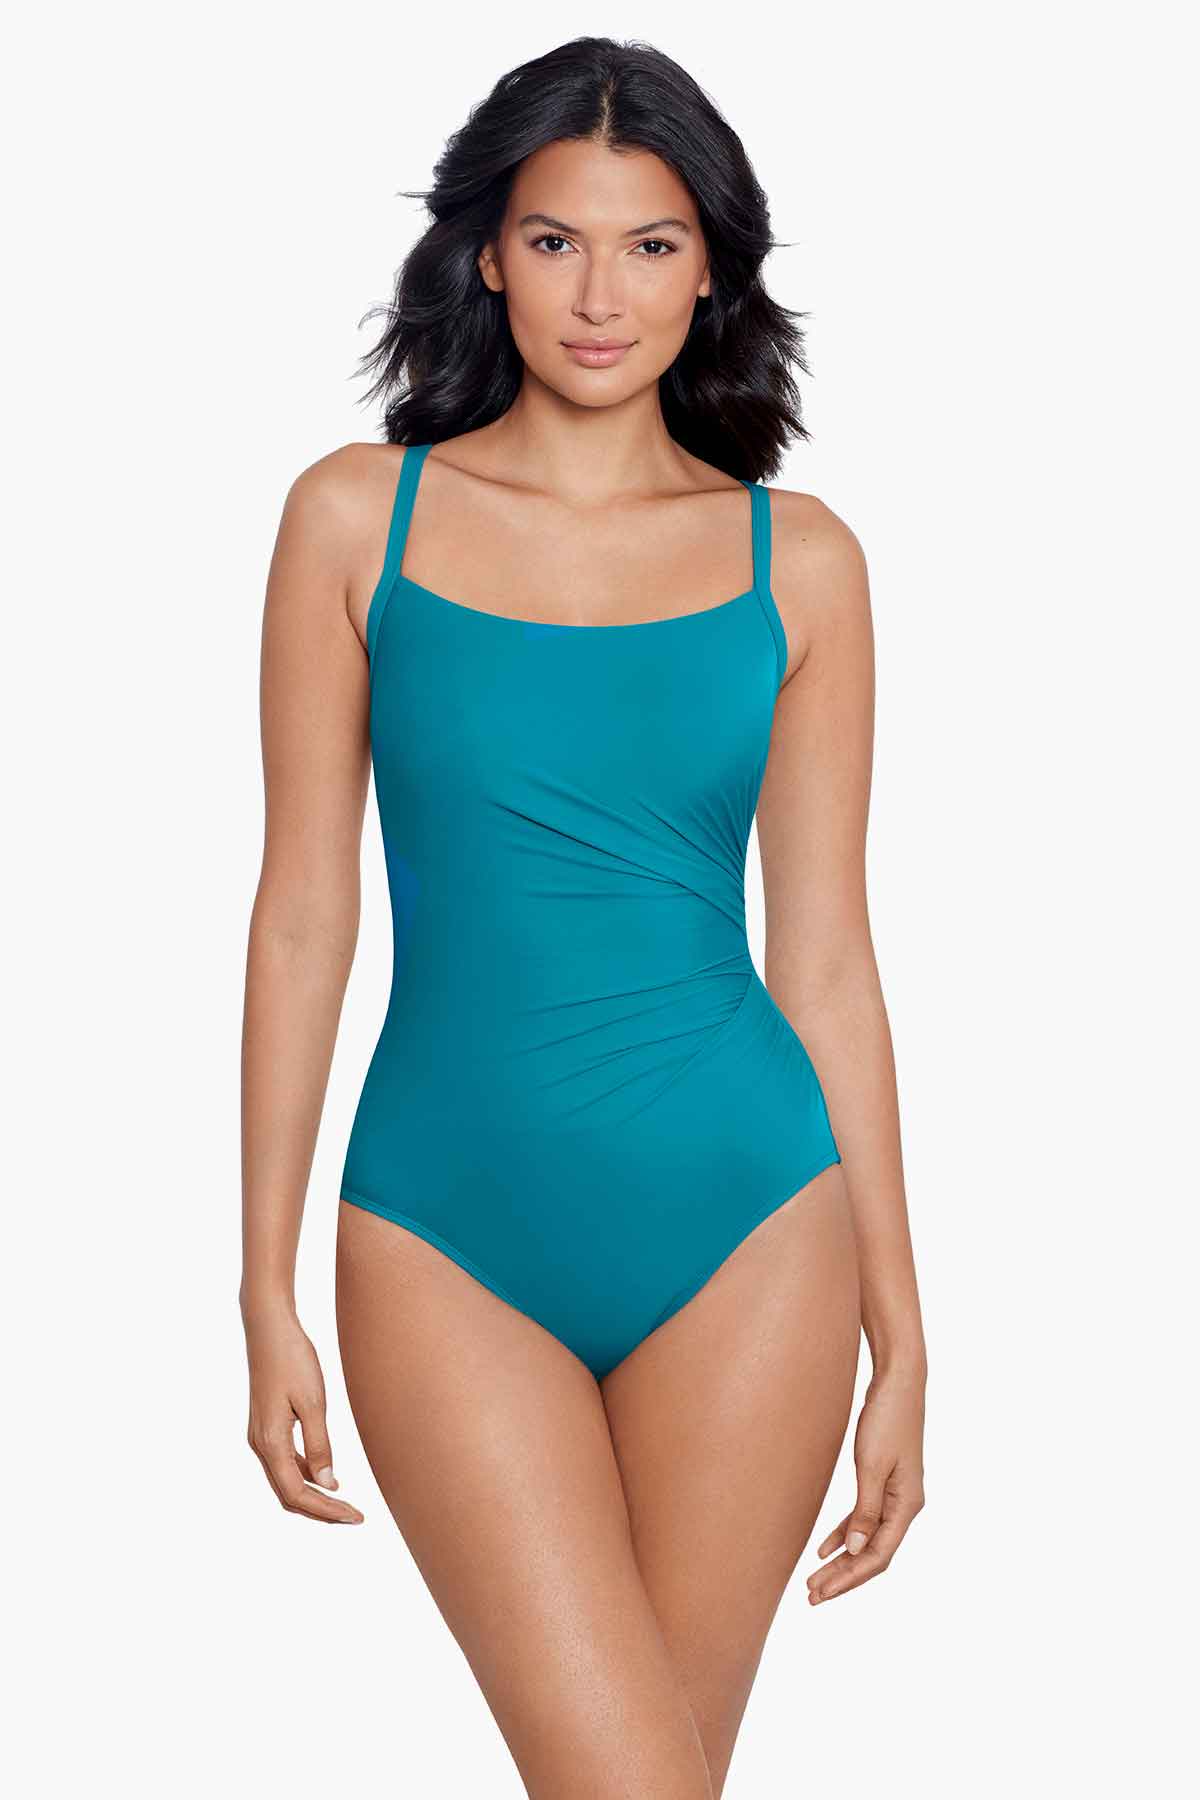 MIRACLESUIT NEW DIRECTIONS MUSE UNDERWIRE ONE PIECE SWIM SUIT BLUE